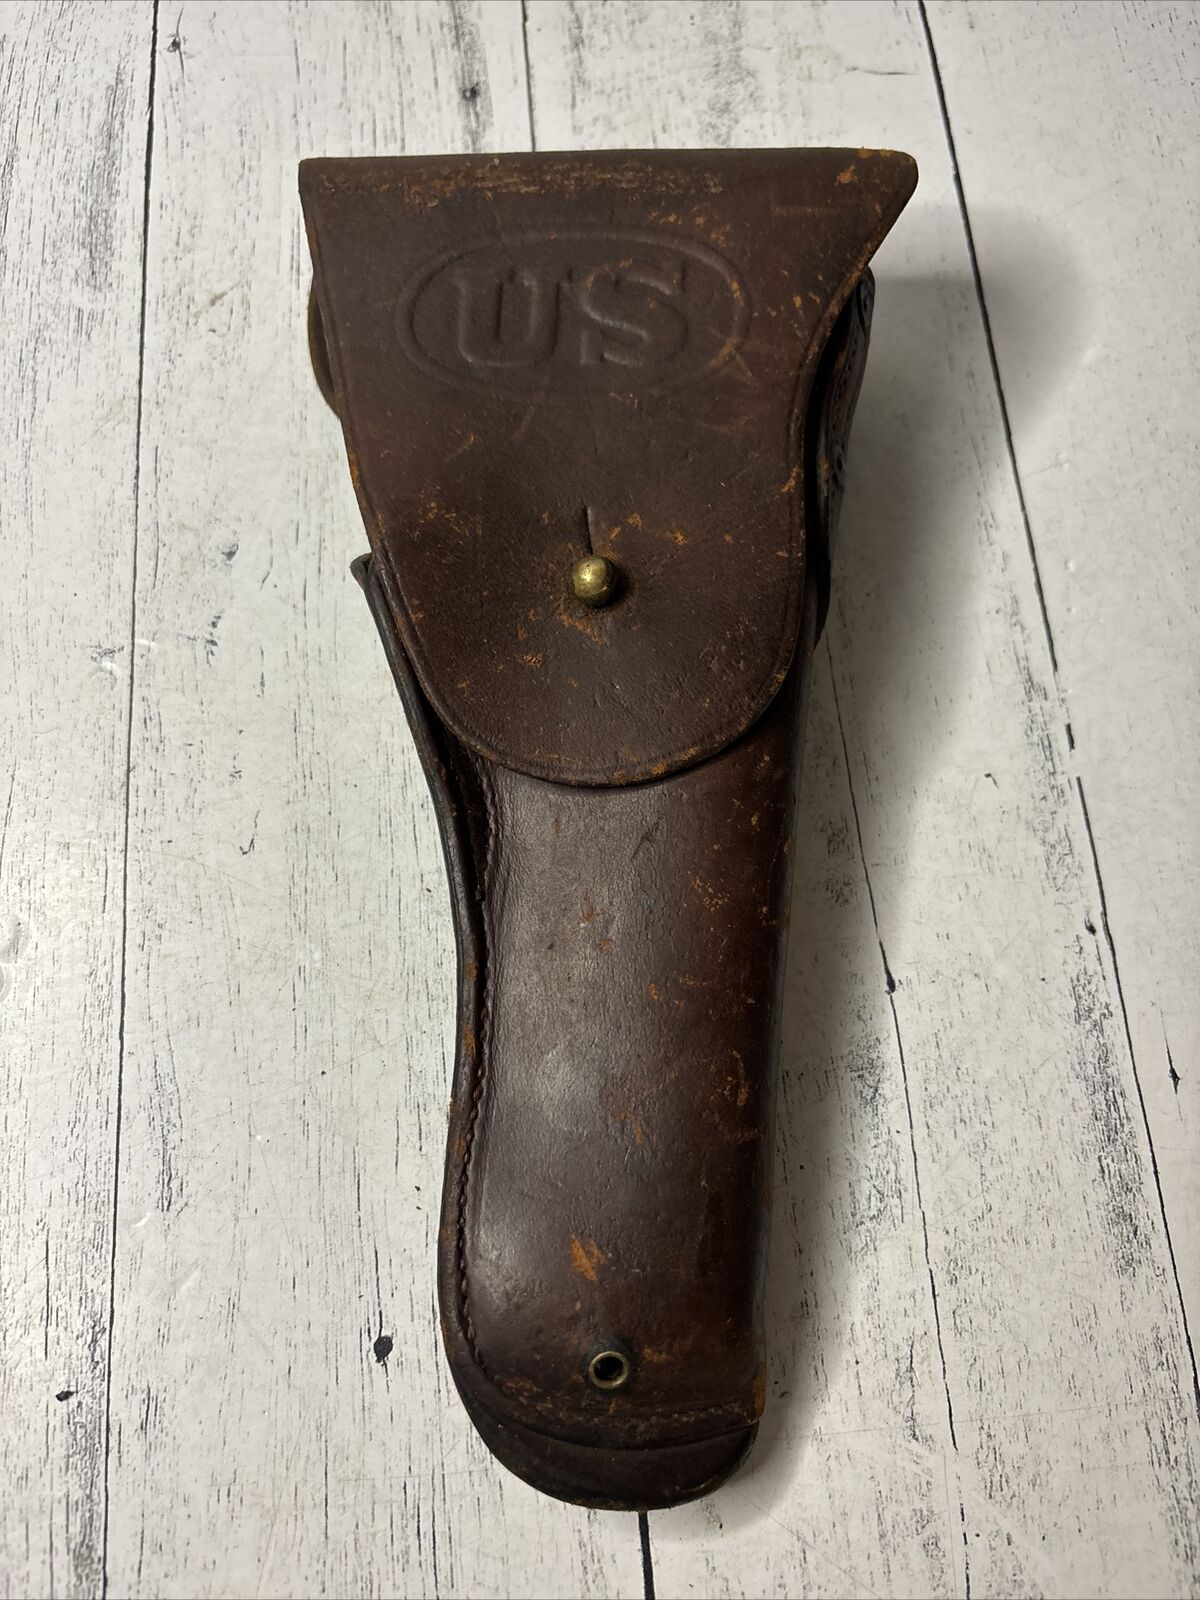 US M1911 Pistol Leather Holster Stamped Rock Island Arsenal